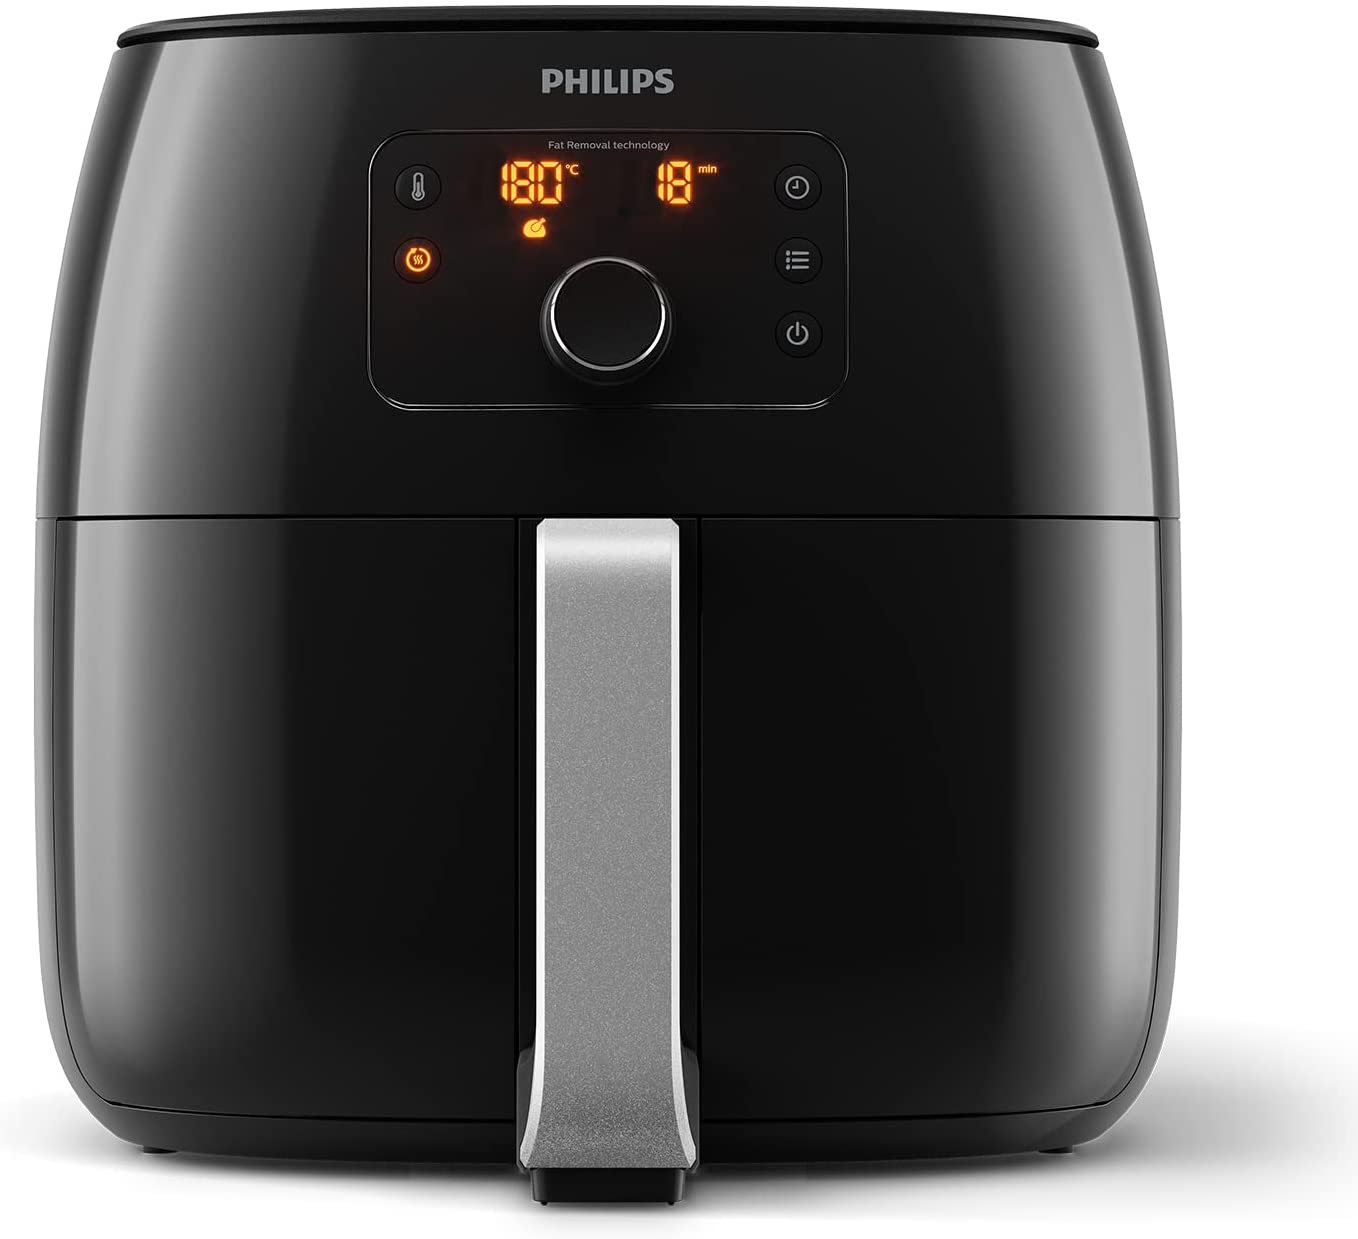 Philips Domestic Appliances Philips HD9762 / 90 Airfryer XXL - the original (2225 W, hot air fryer, for 4-5 people, 1400g, digital display) black